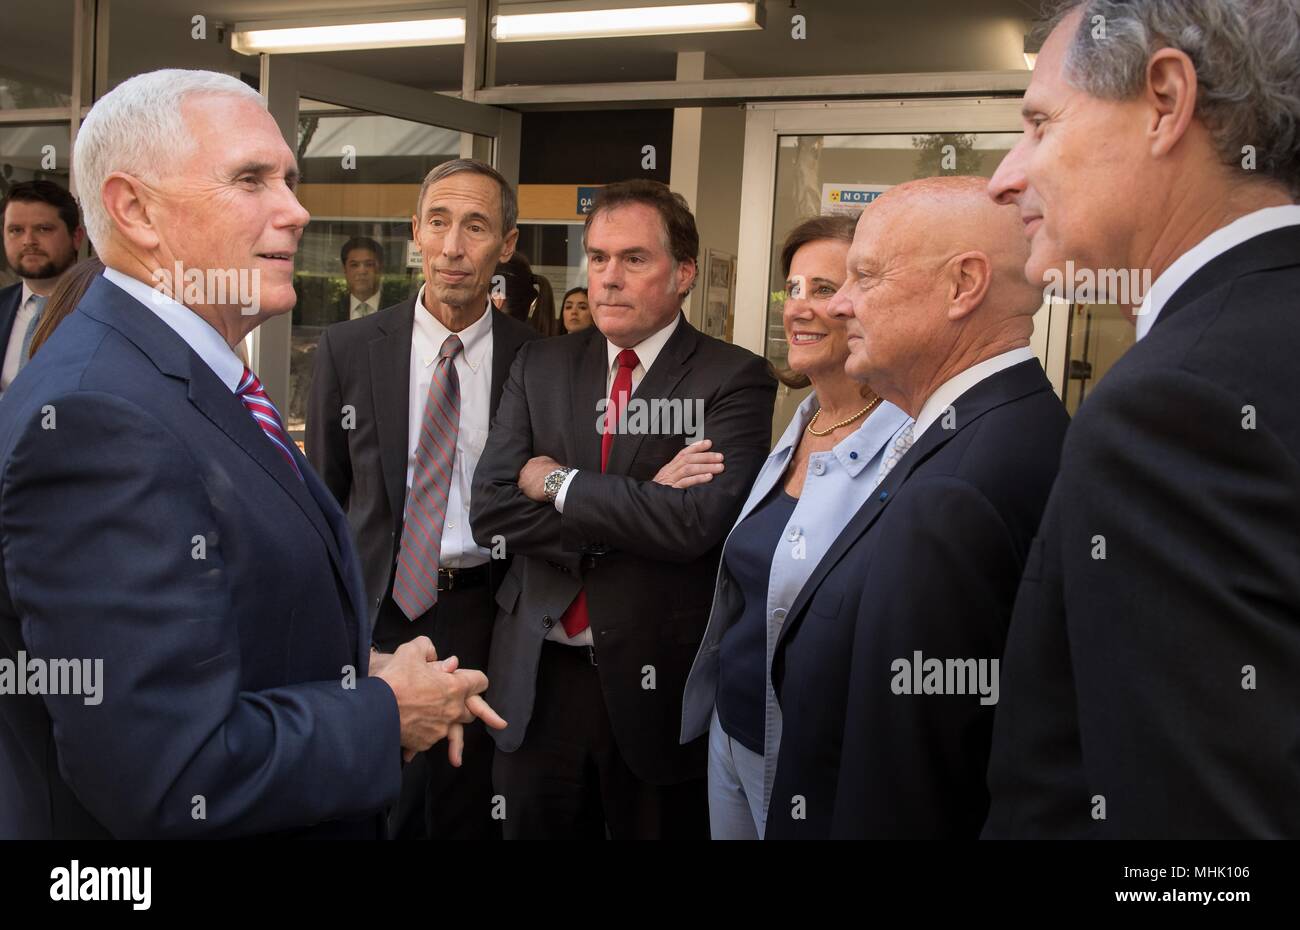 U.S. Vice President Mike Pence, left, thanks members of the NASA Jet Propulsion Laboratory leadership following a visit April 28, 2018 in Pasadena, California. Standing from left to right are: JPL Deputy Director Larry James, JPL Director Michael Watkins, JPL Distinguished Visiting Scientist and Spouse of UAG Chairman James Ellis, Elisabeth Pate-Cornell , UAG Chairman, James Ellis and California Institute of Technology President Thomas Rosenbaum. Stock Photo